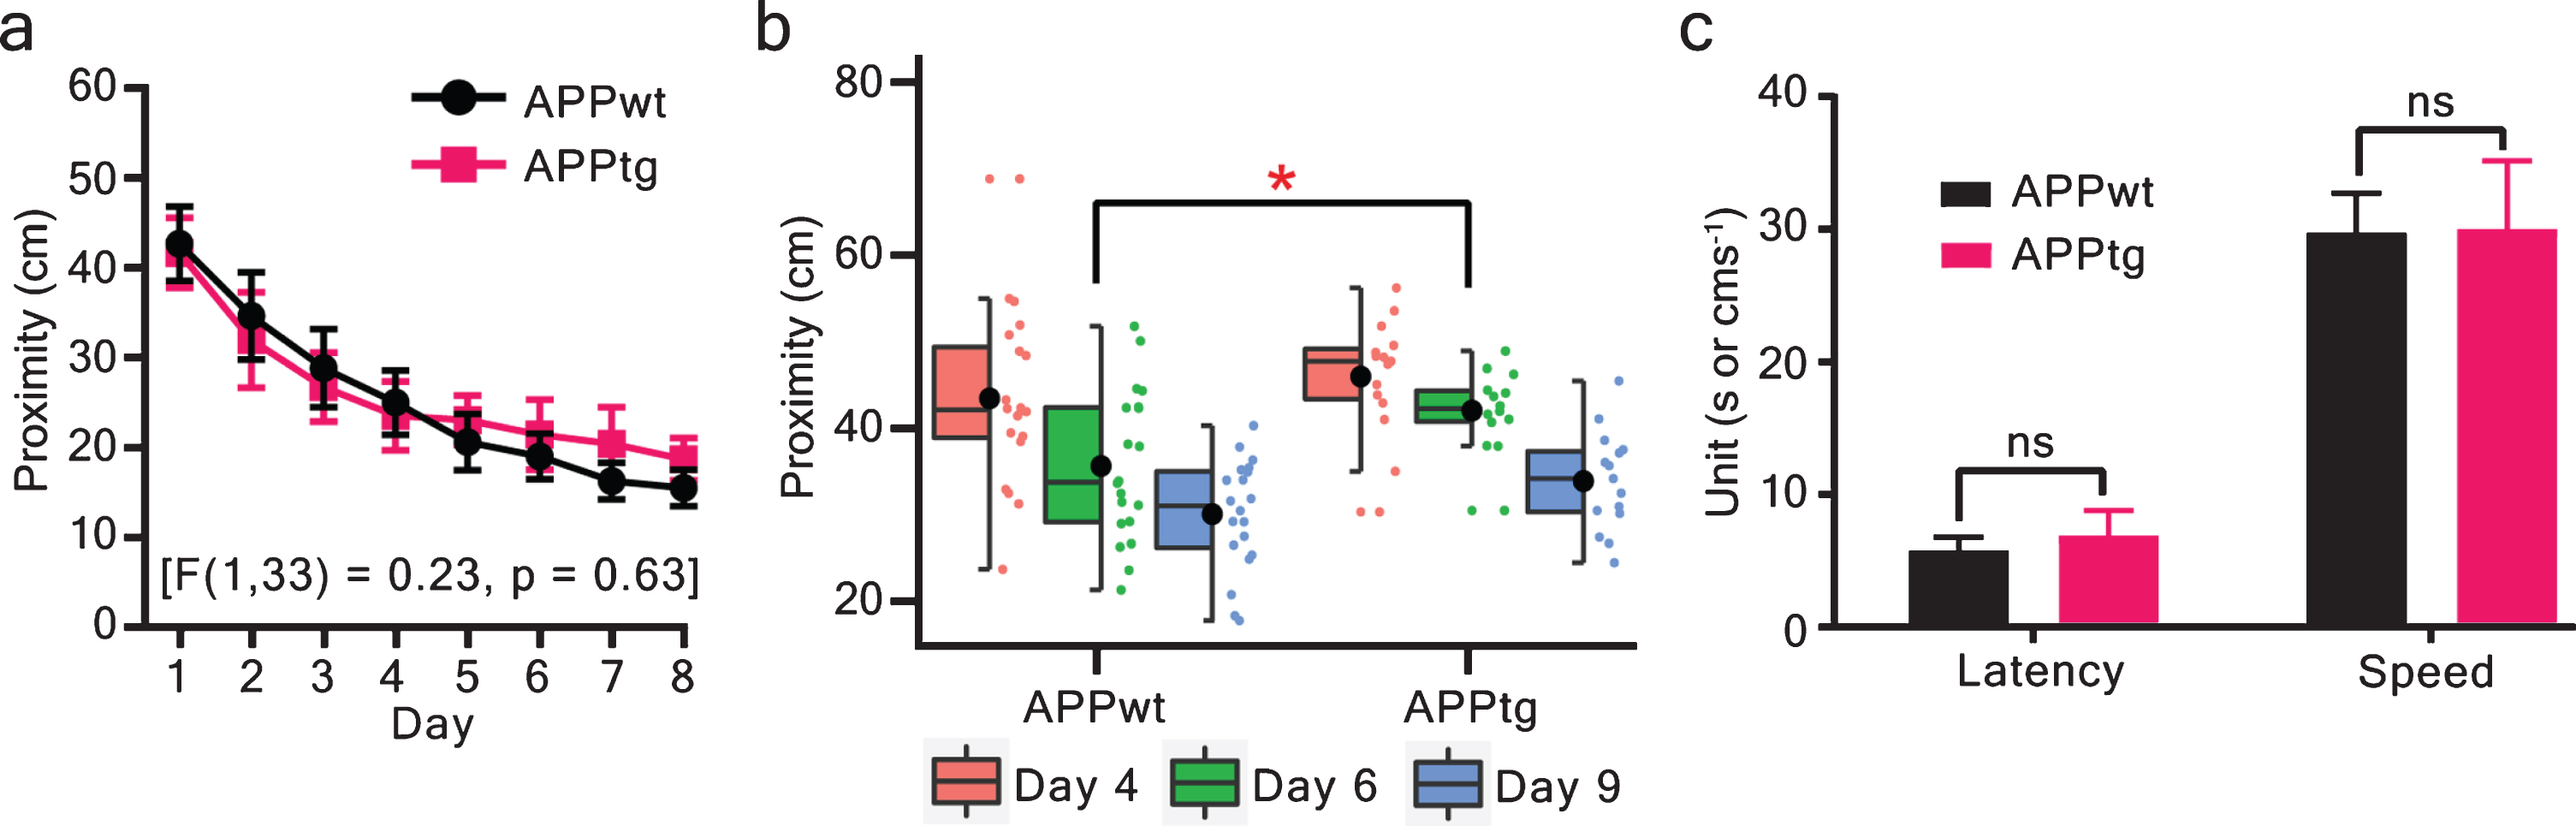 MCI was not detected using the long ITI (spaced trials) protocol. Learning and memory were assessed via proximity during training trials and probe trials. a) ANOVA on a mixed model repeated measures did not show any statistically significant group effect. b) Probe trials were conducted on day 4, day 6, and day 9 to assess memory. The proximity values were evaluated and showed that both groups decreased their proximity values as a function of probe trial-day. However, APPwt performed statistically better than APPtg on day 6 (two-tailed unpaired t-test - proximity: p = 0.01. The figure is a half-boxplot with jitter points. A horizontal line is a median, a black circle indicates a mean, a box shows interquartile range (IQR), and the whiskers are 1.5 X IQR. Additionally, individual points are shown as jitter points in a separate vertical column alongside boxplot. c) at the end of the WM task, visual cue trials were conducted to assess visual acuity and motor performance (two-tailed unpaired t-test - latency: p = 0.24; speed: p = 0.94). Values are shown as mean±95% CI (confidence interval). ∗p <  0.05; ns: non-significant; APPwt N = 20 and APPtg N = 15 animals.